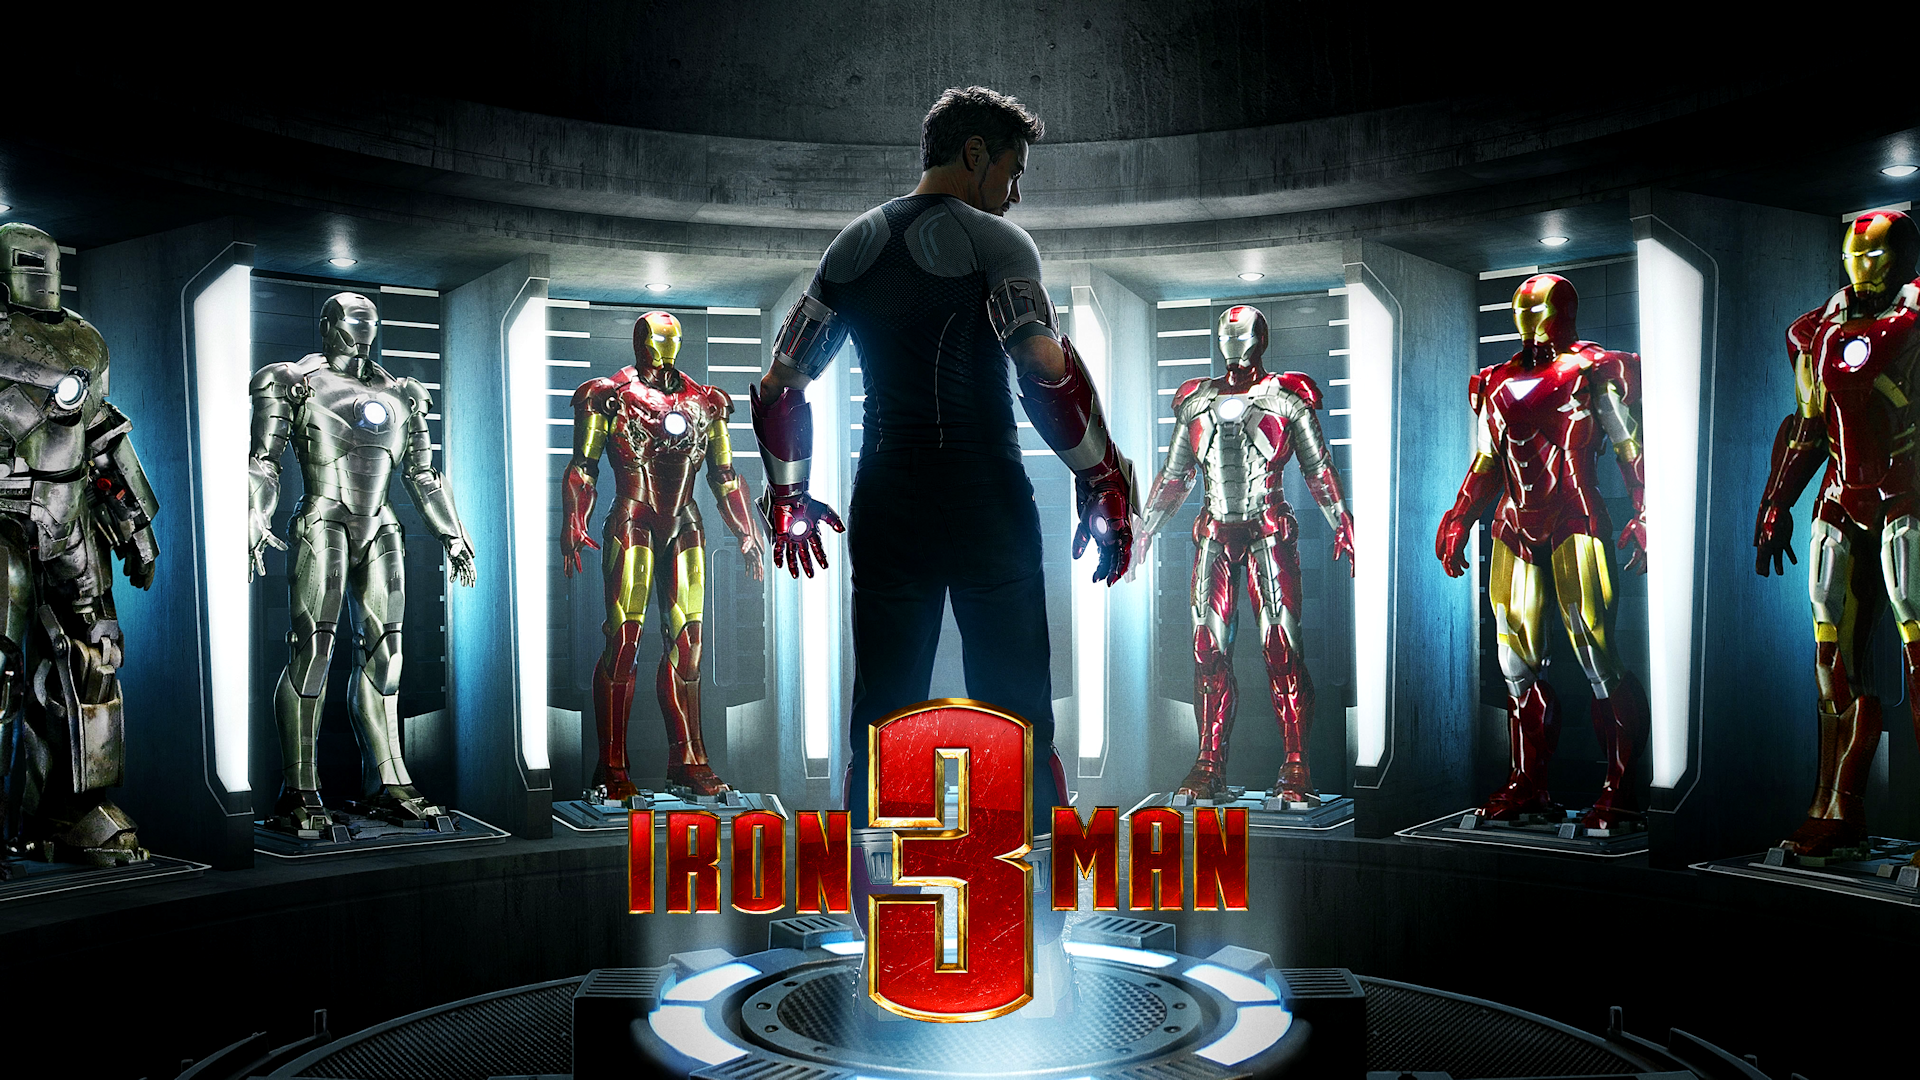 Iron Man 3 Suits of Armor Exclusive HD Wallpapers 2325